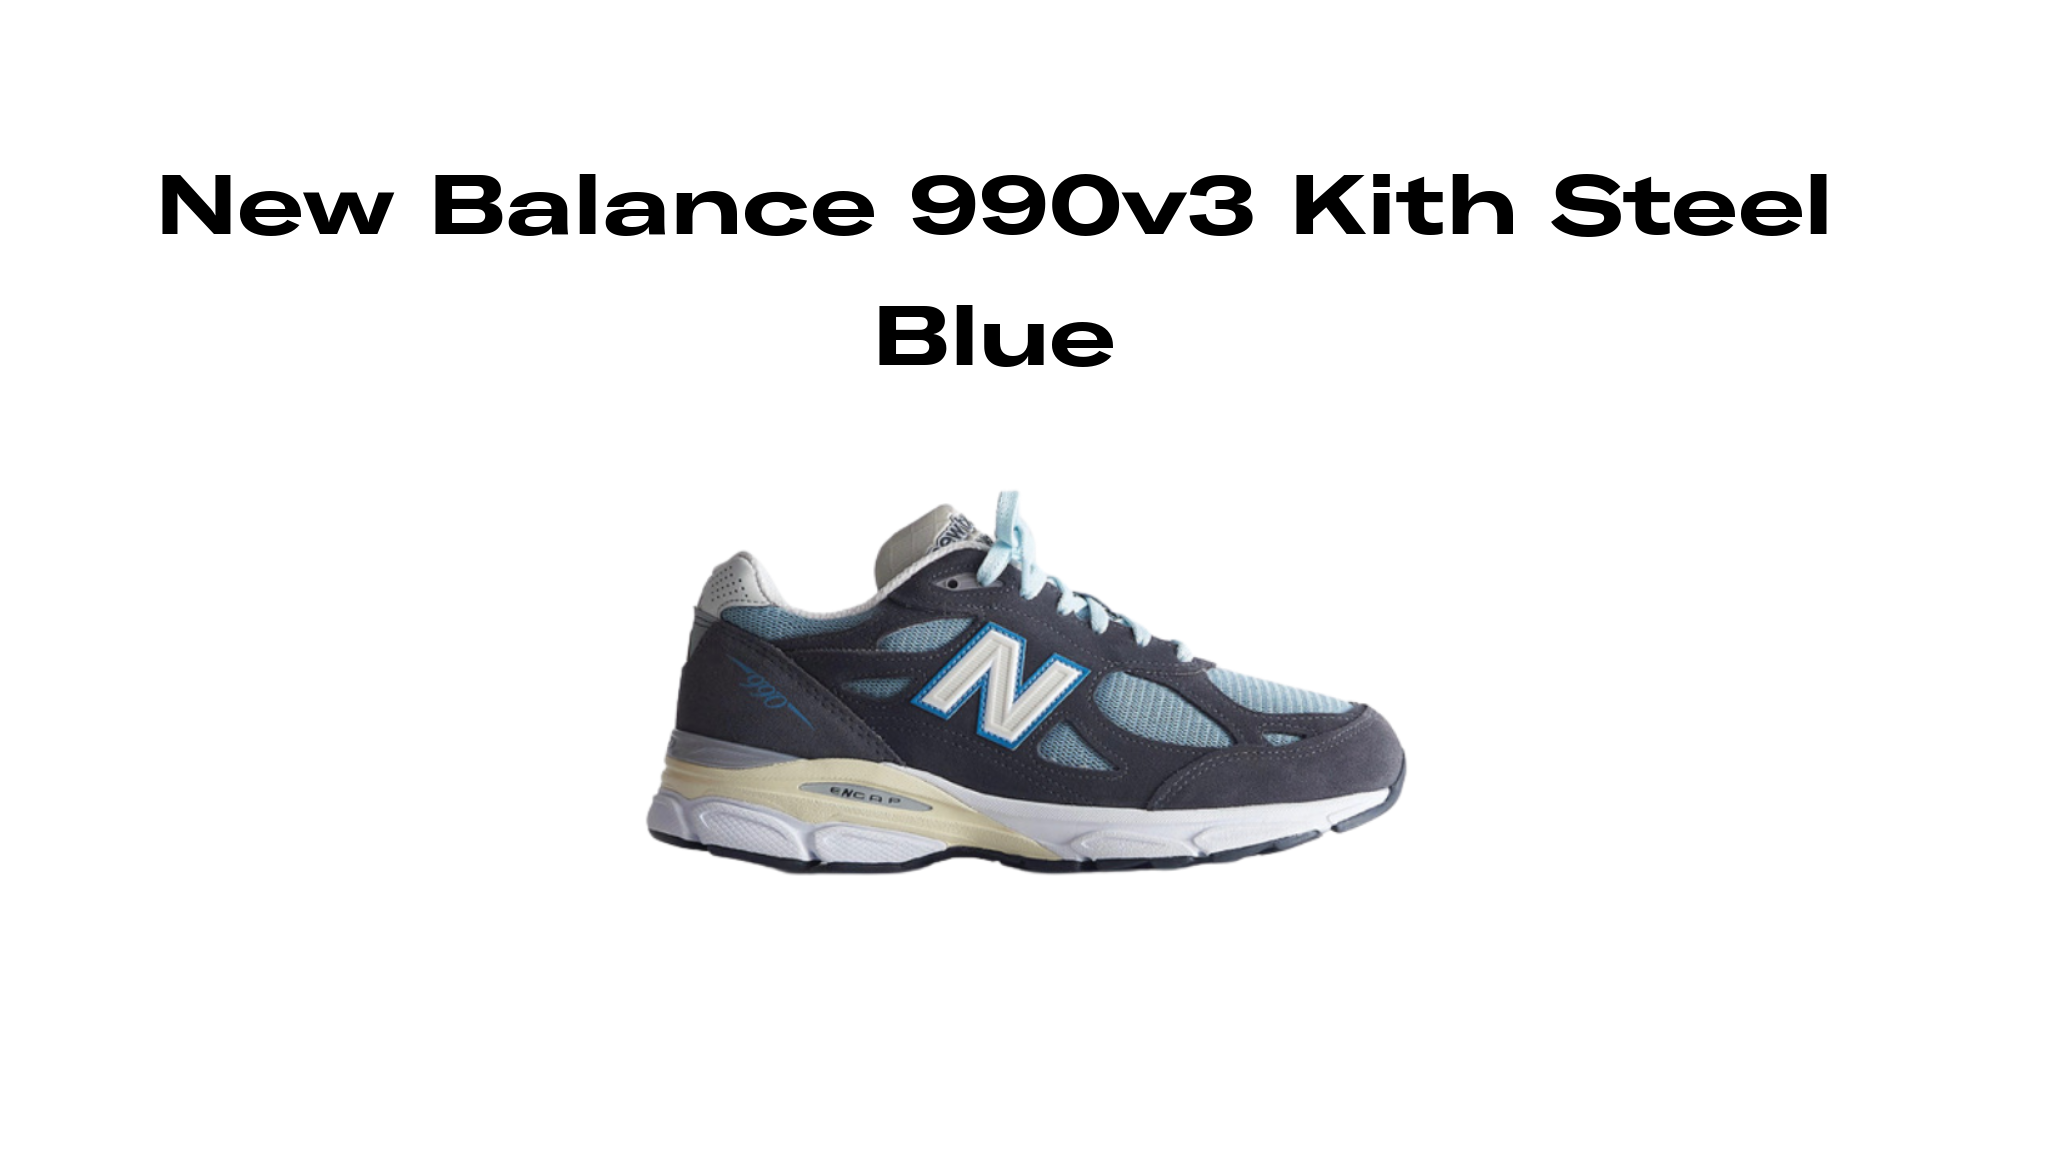 New Balance 990v3 Kith Steel Blue Release Date, Raffles, and Where 